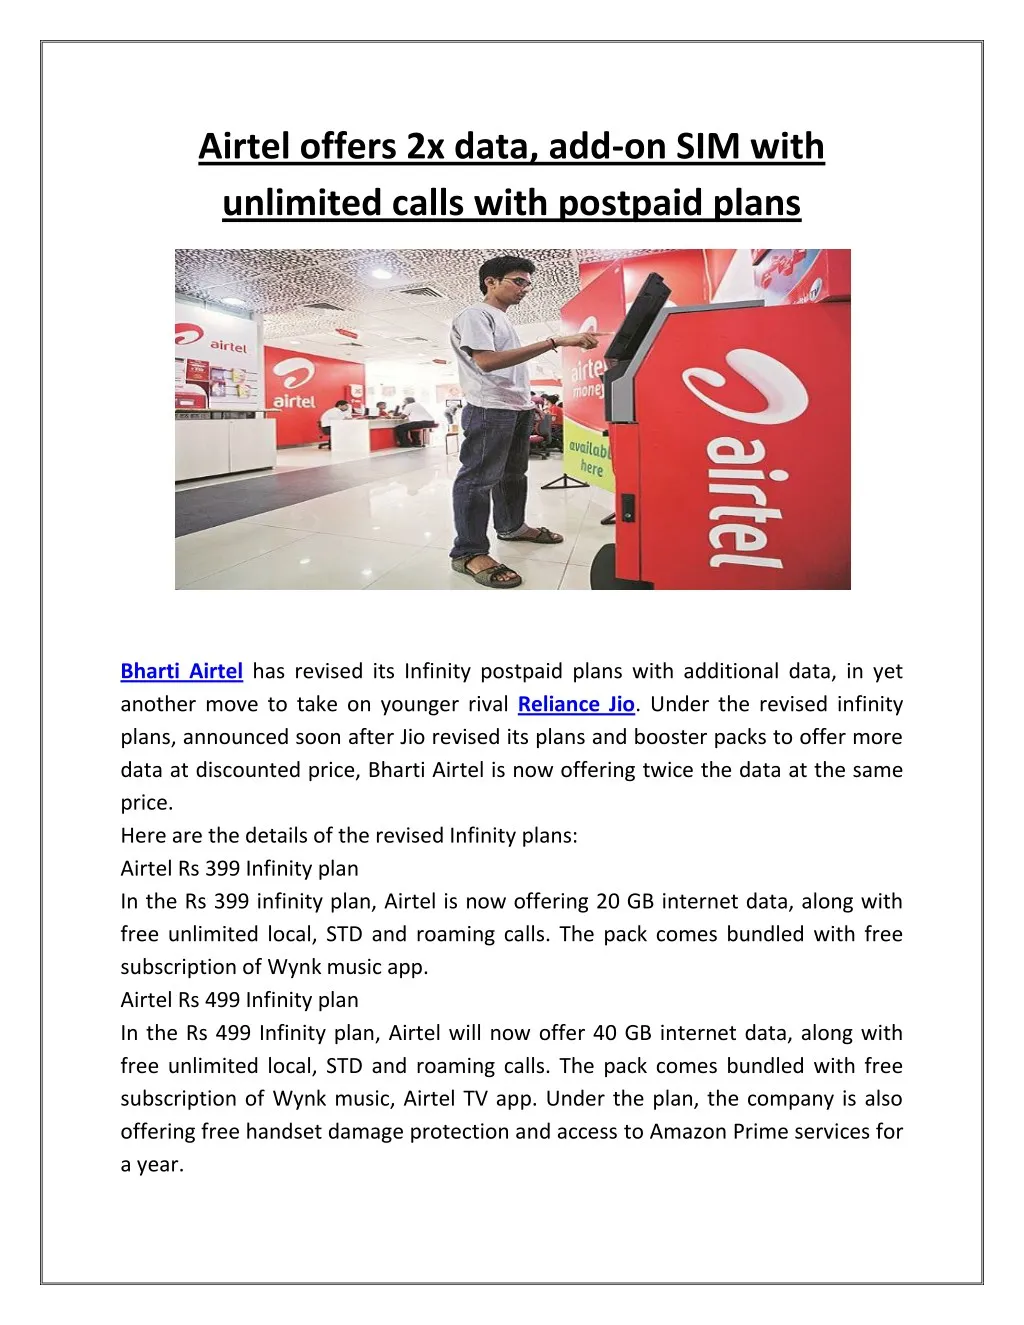 airtel offers 2x data add on sim with unlimited